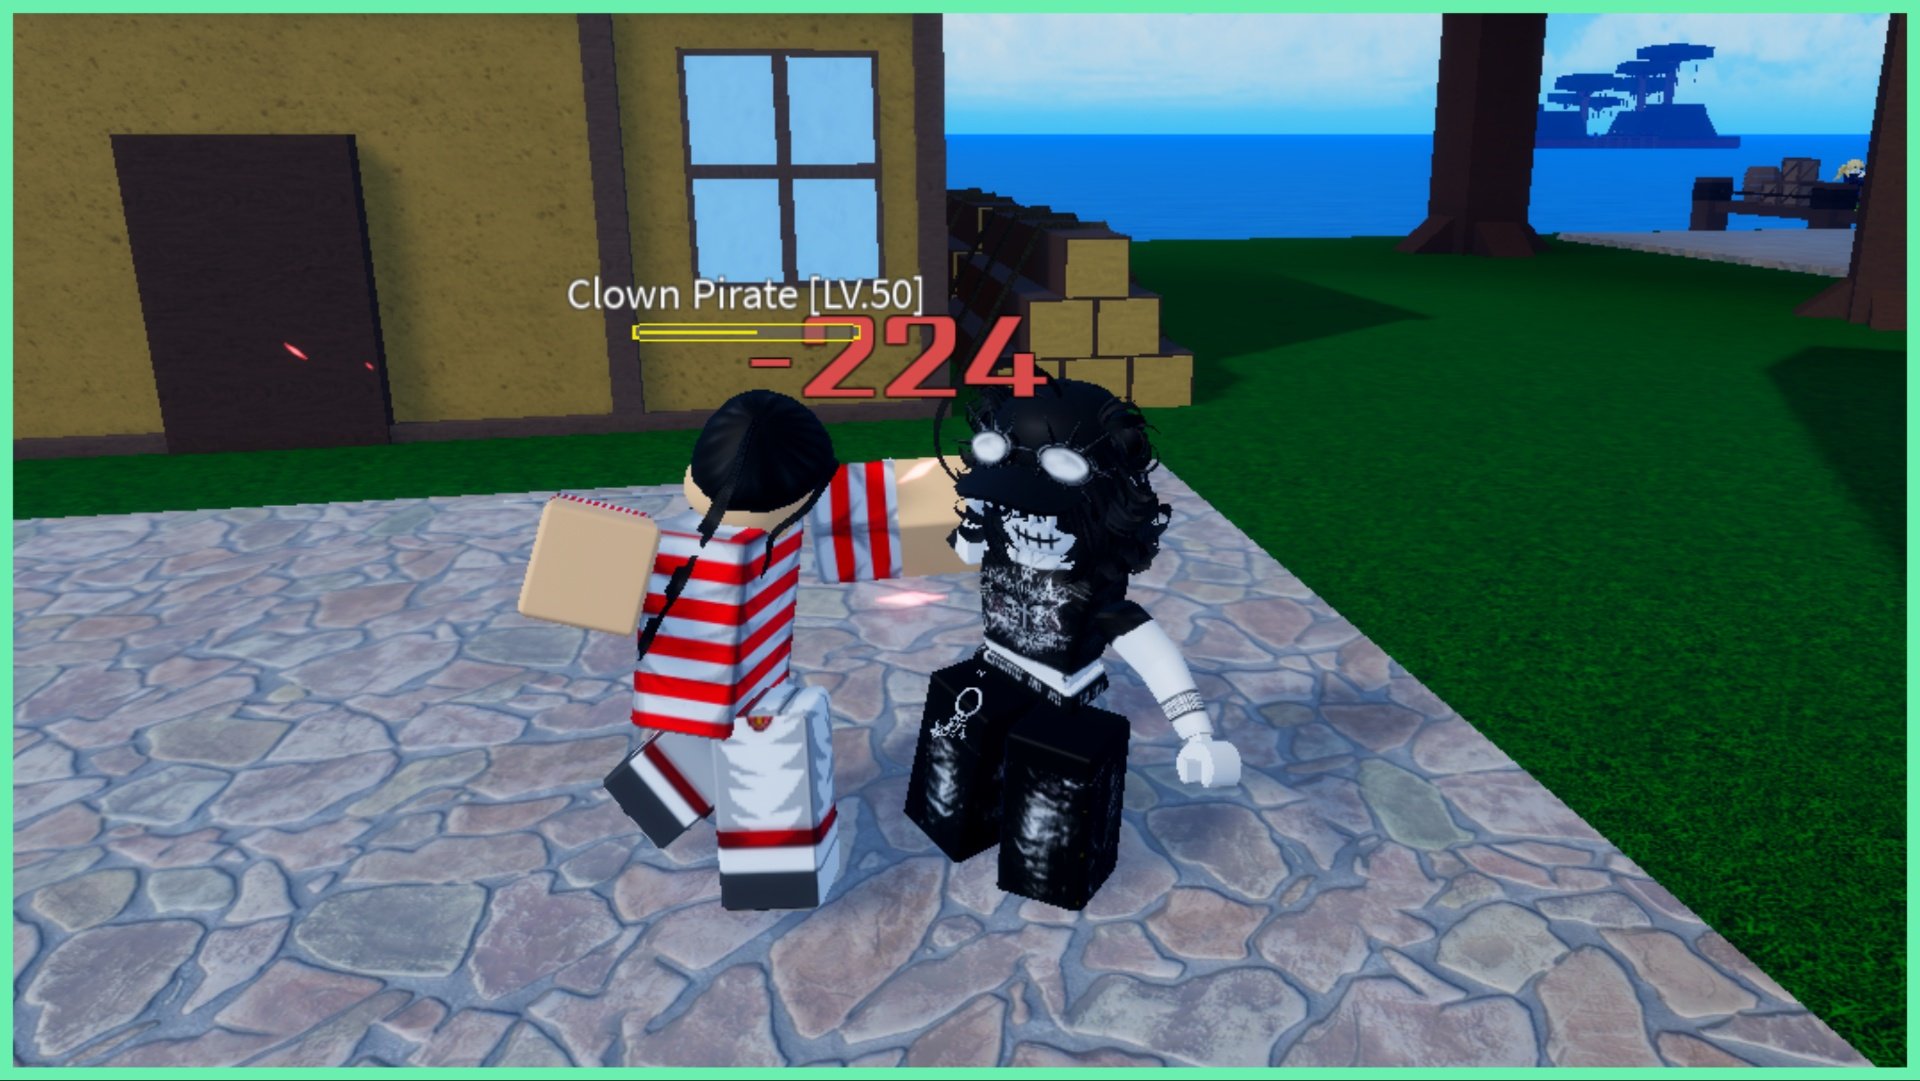 The image shows my avatar in combat with a clown pirate who is throwing a punch towards my character. The surrounding area has buildings, cobbled floors and in the far distance is the ocean